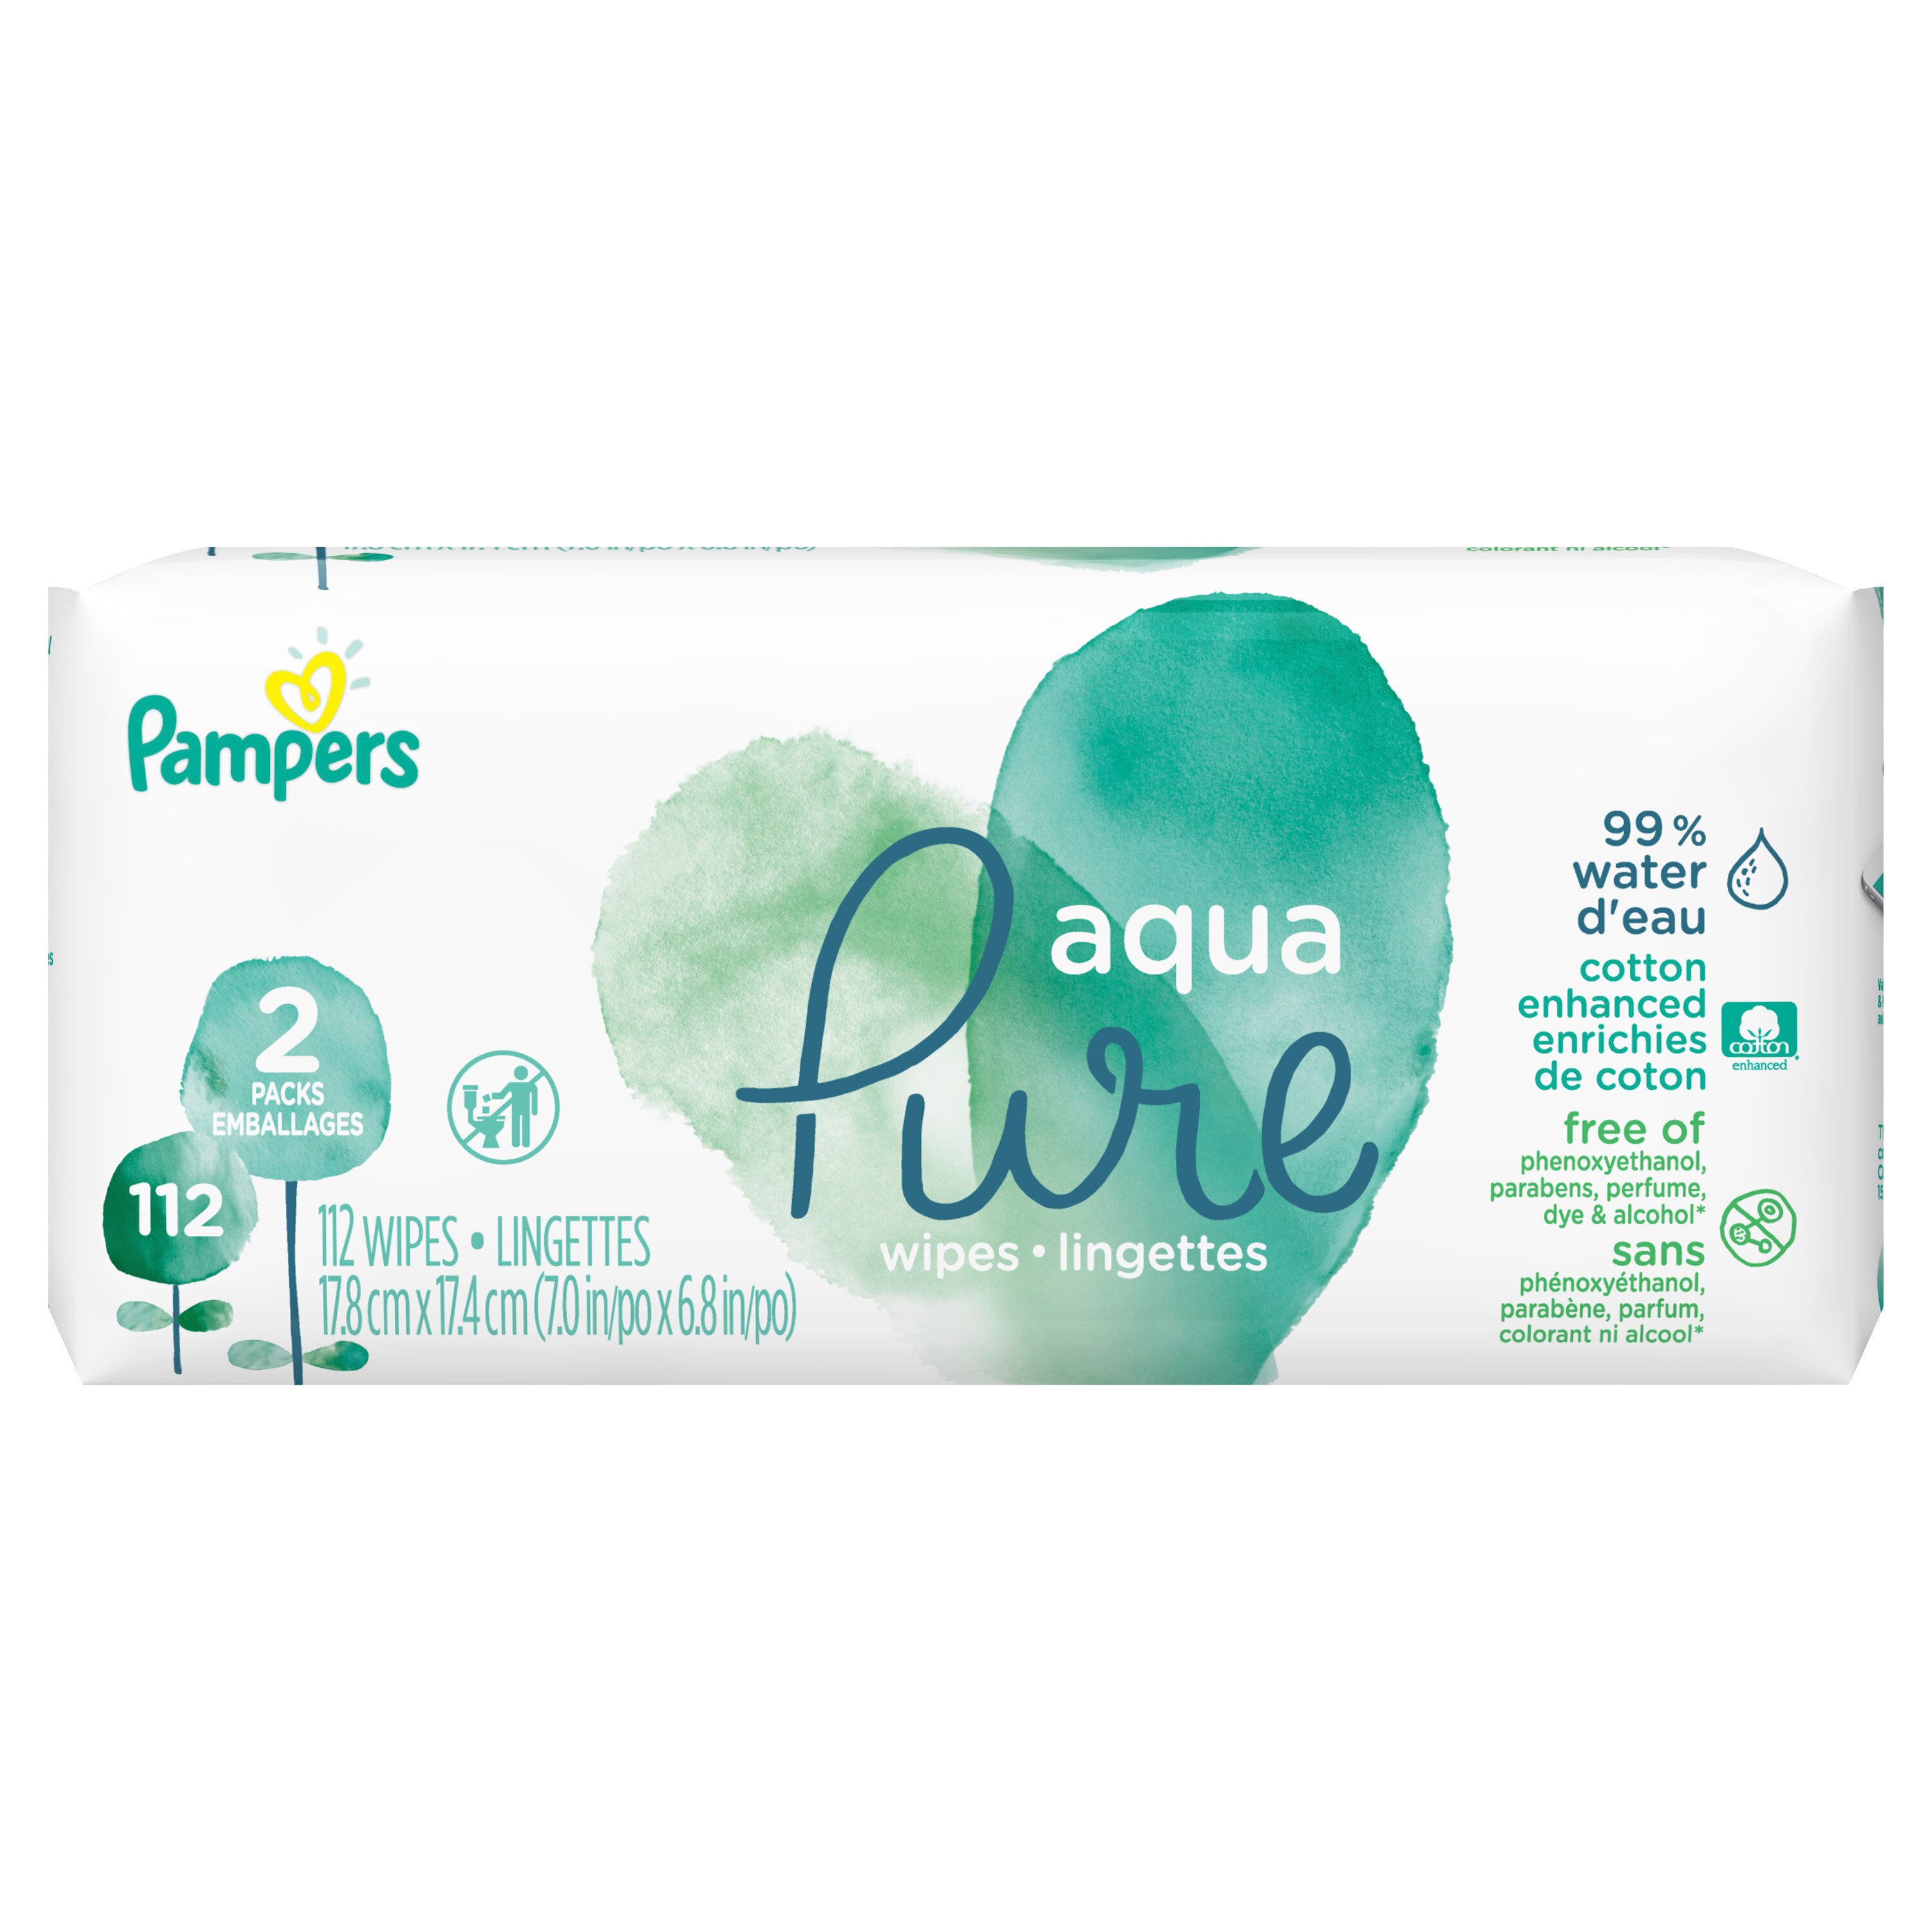 Pampers Aqua Pure Baby Wipes, 112 CT